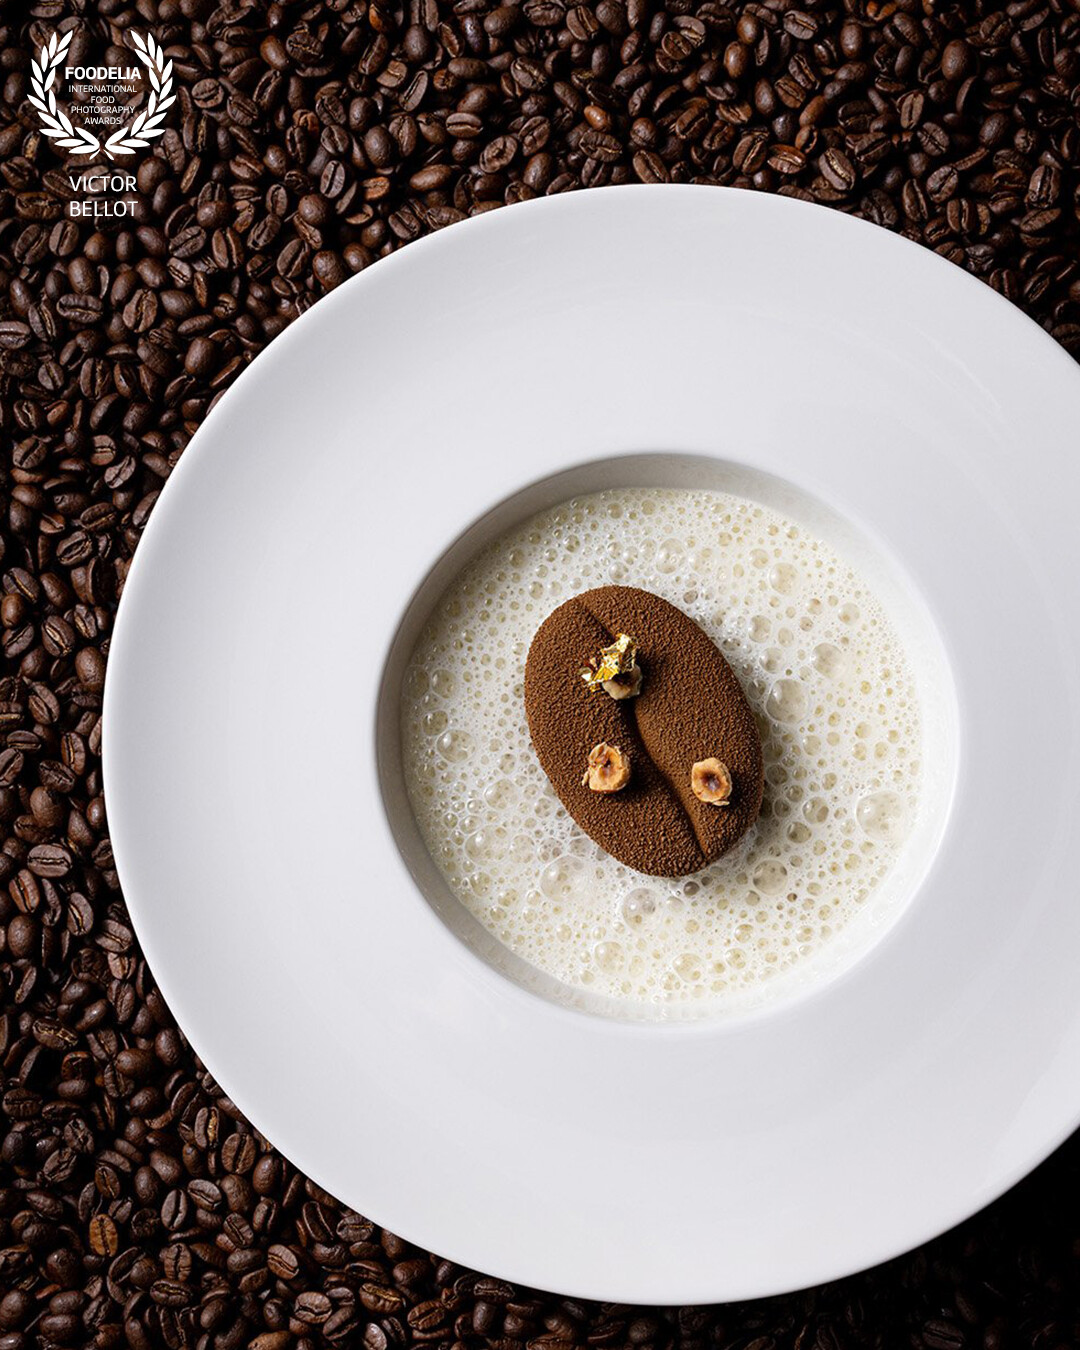 Coffee bean, old-fashioned crunchy and veil of milk.<br />
<br />
Dessert designed by pastry chef Nicolas Pelletier of the Voyage Samaritaine restaurant in Paris.